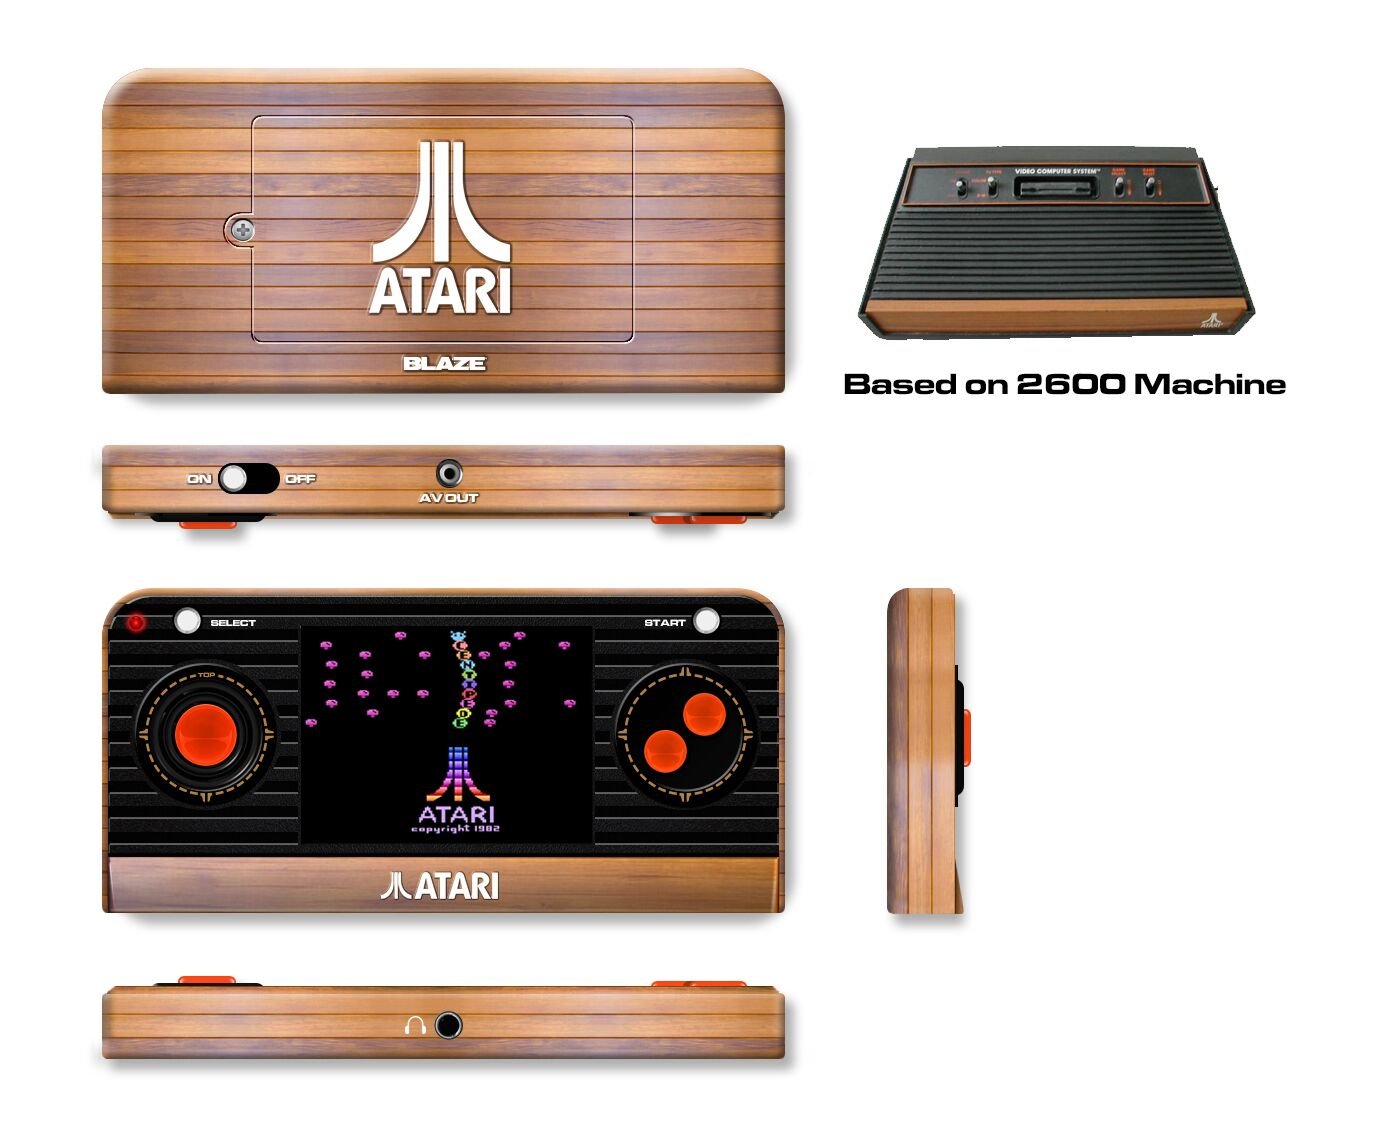 Atari Retro Inspired Plug And Play And Handheld Console Announced1381 x 1124